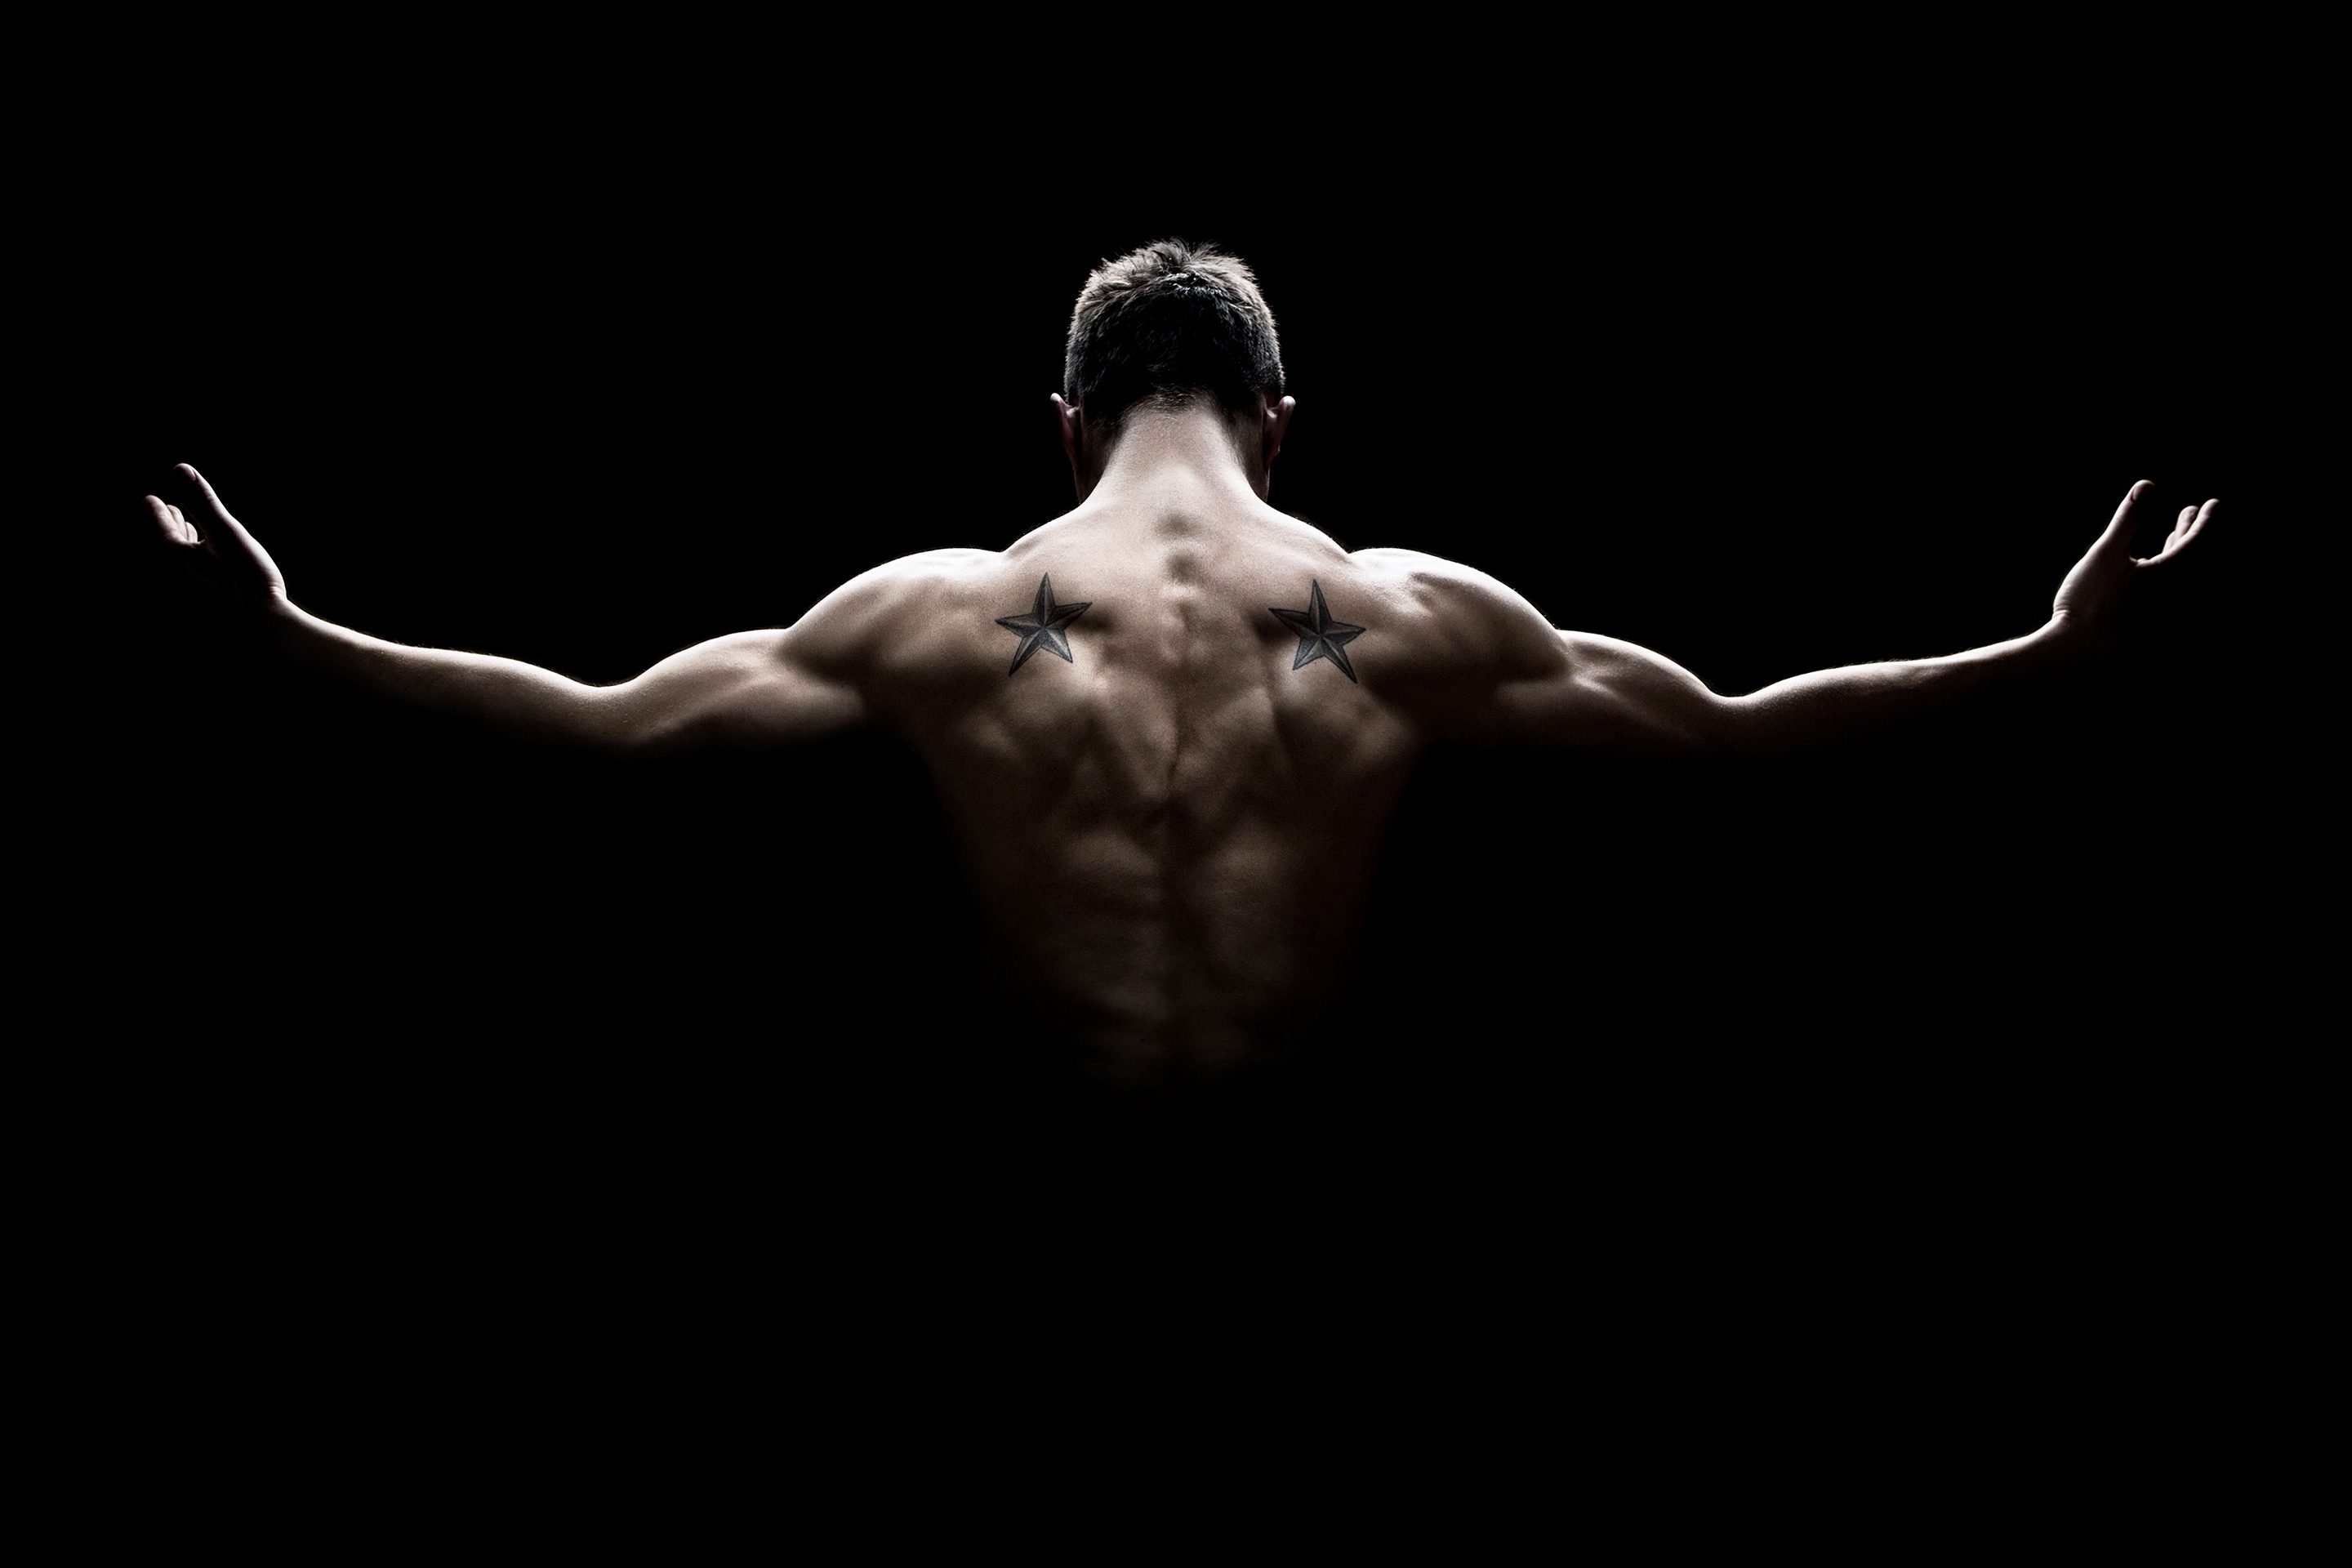 A man flexing his back muscles on a black background